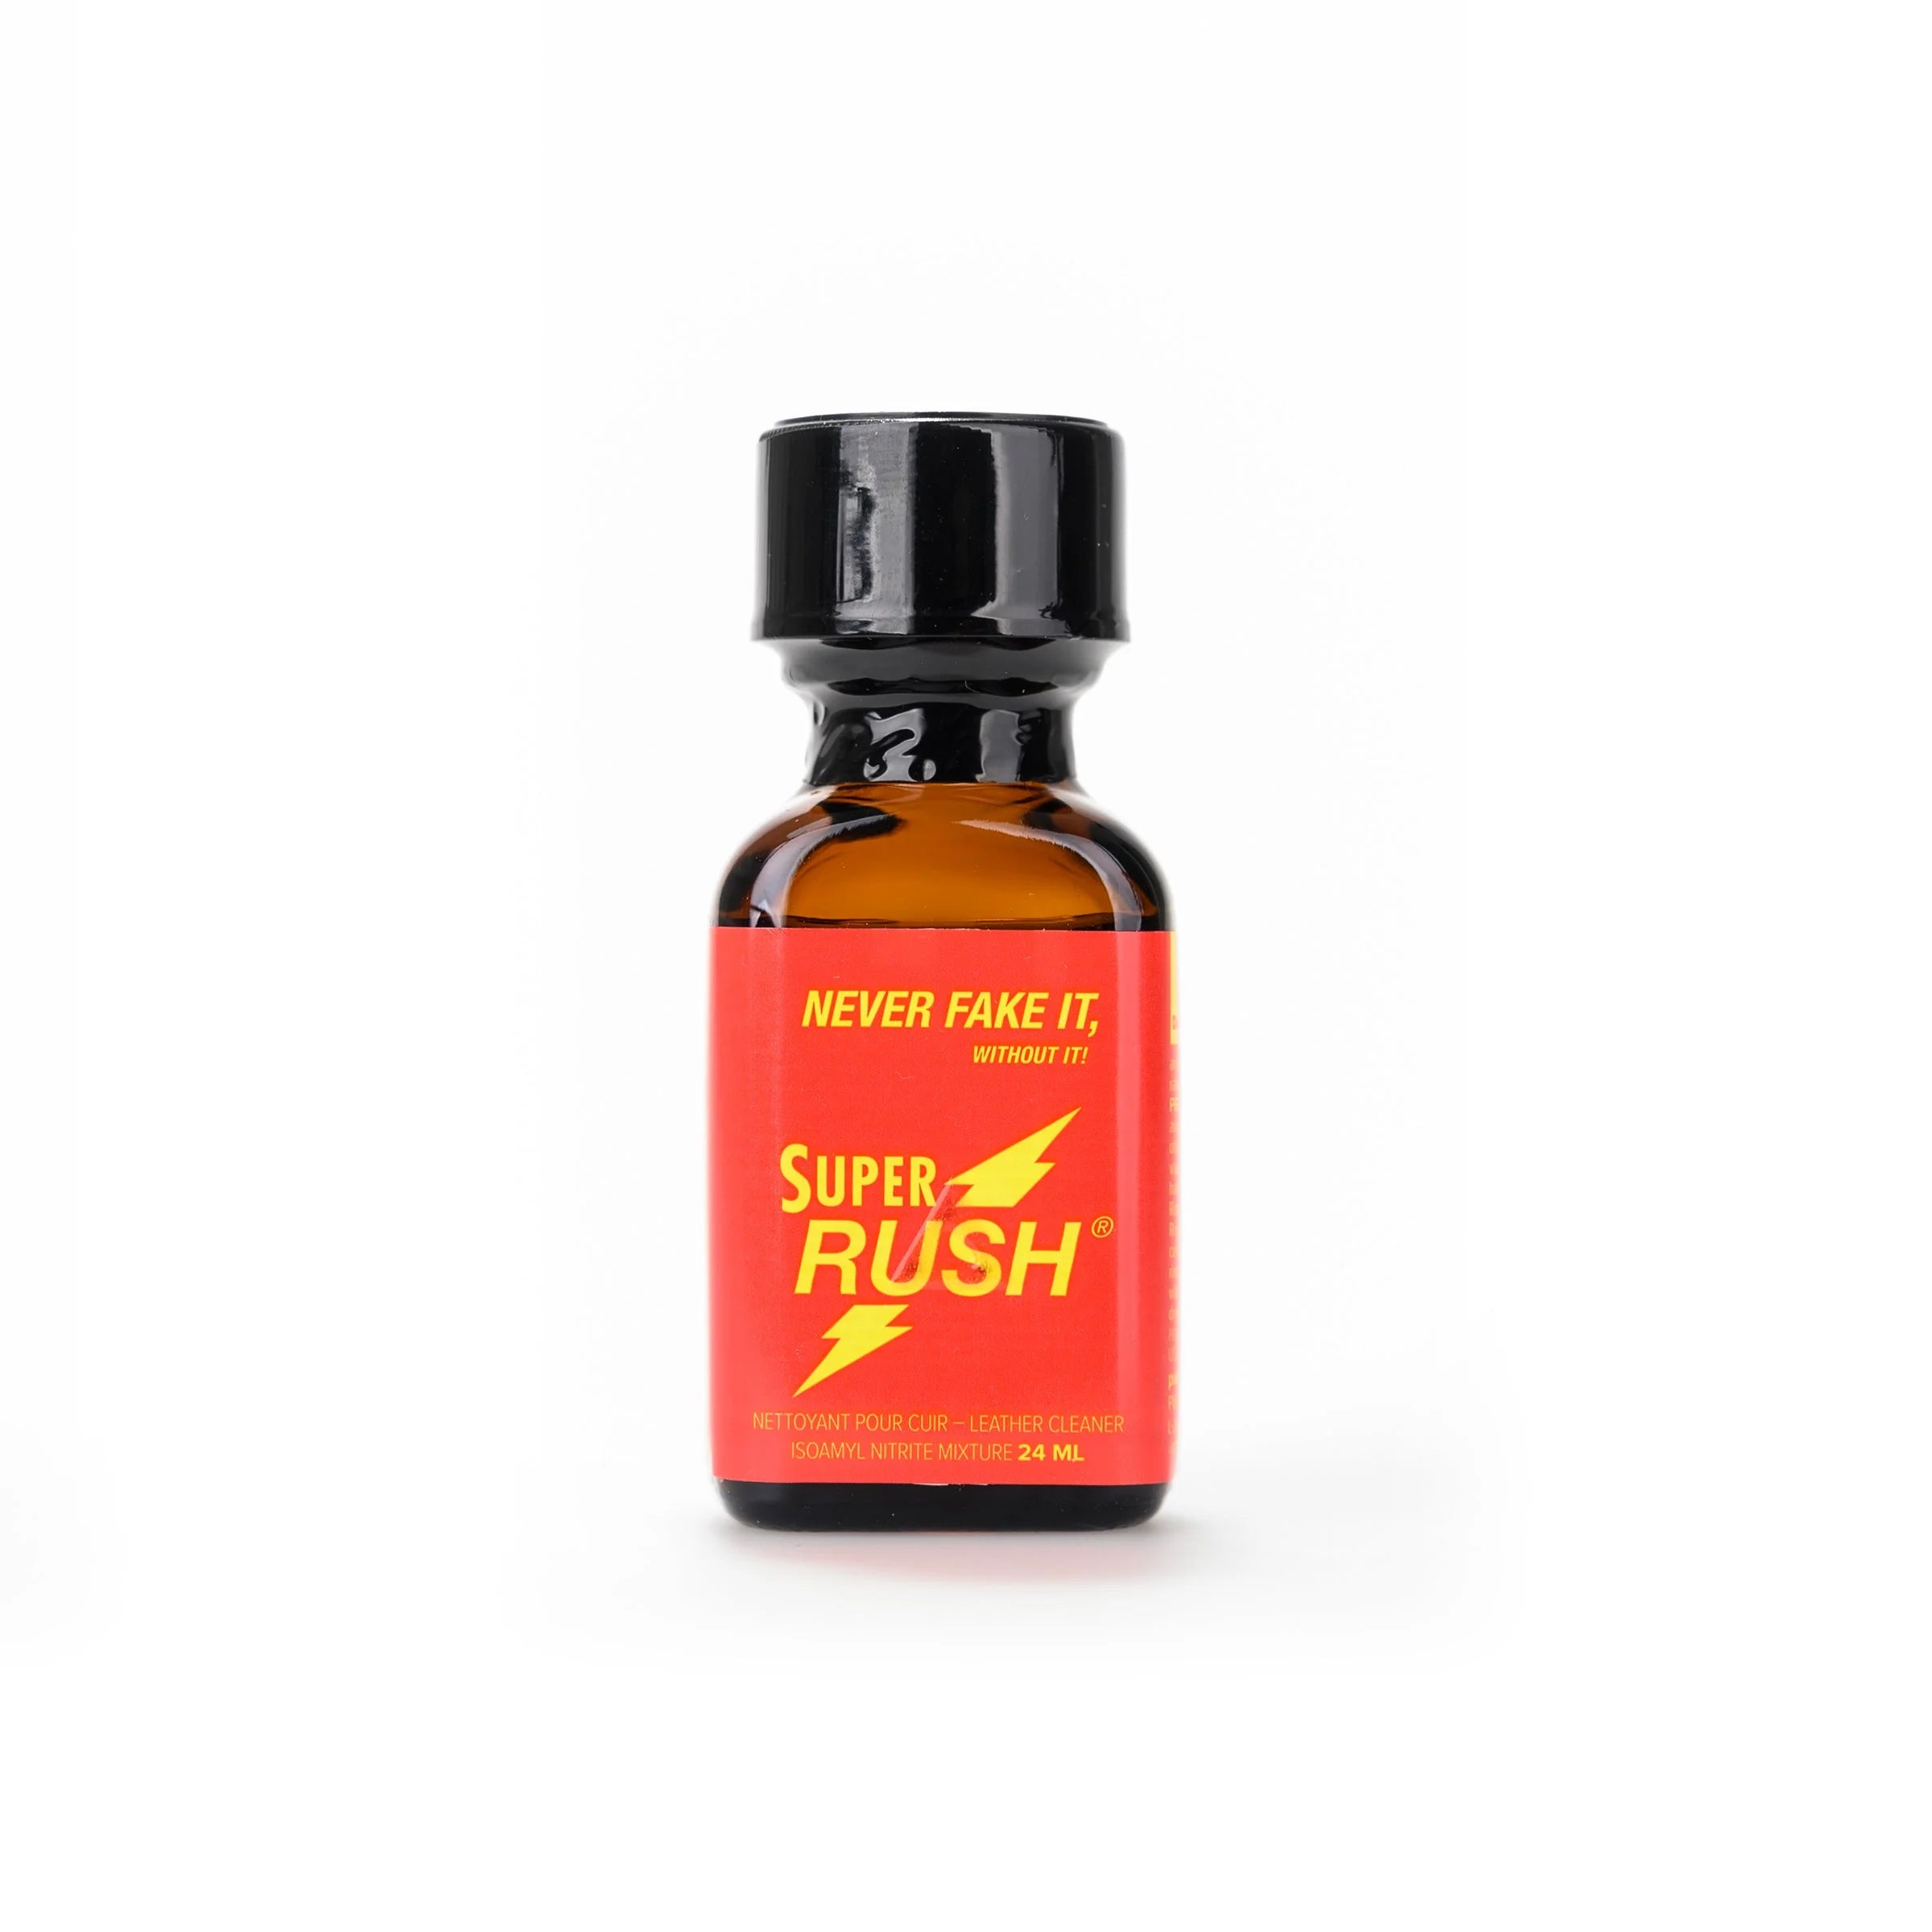 A product photo of a 24ml bottle of Super Rush Poppers.